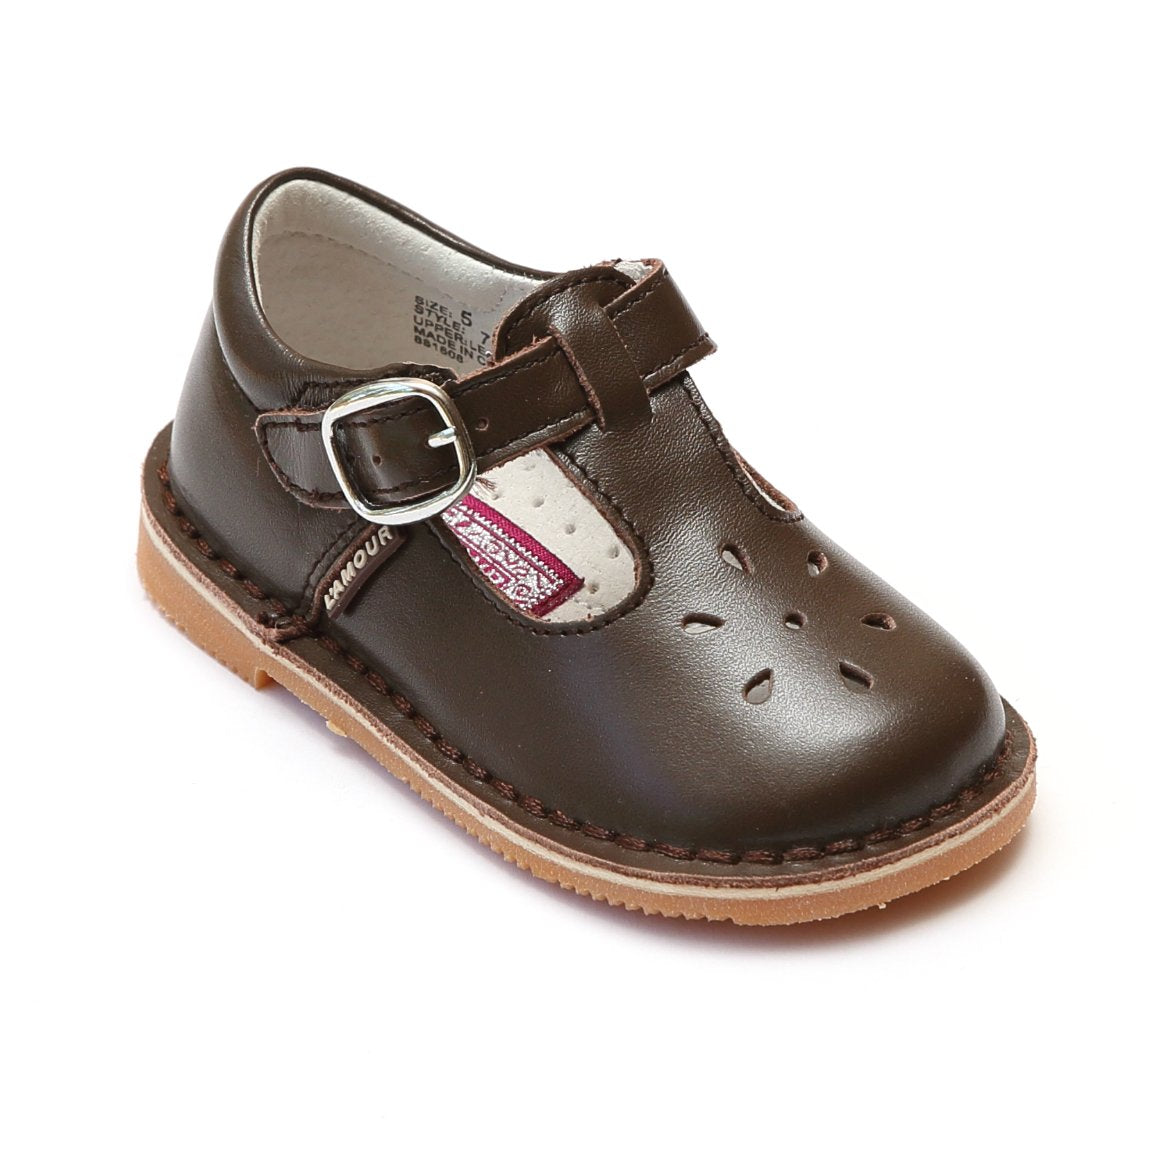 T-Strap Mary Jane Style 751 - Brown